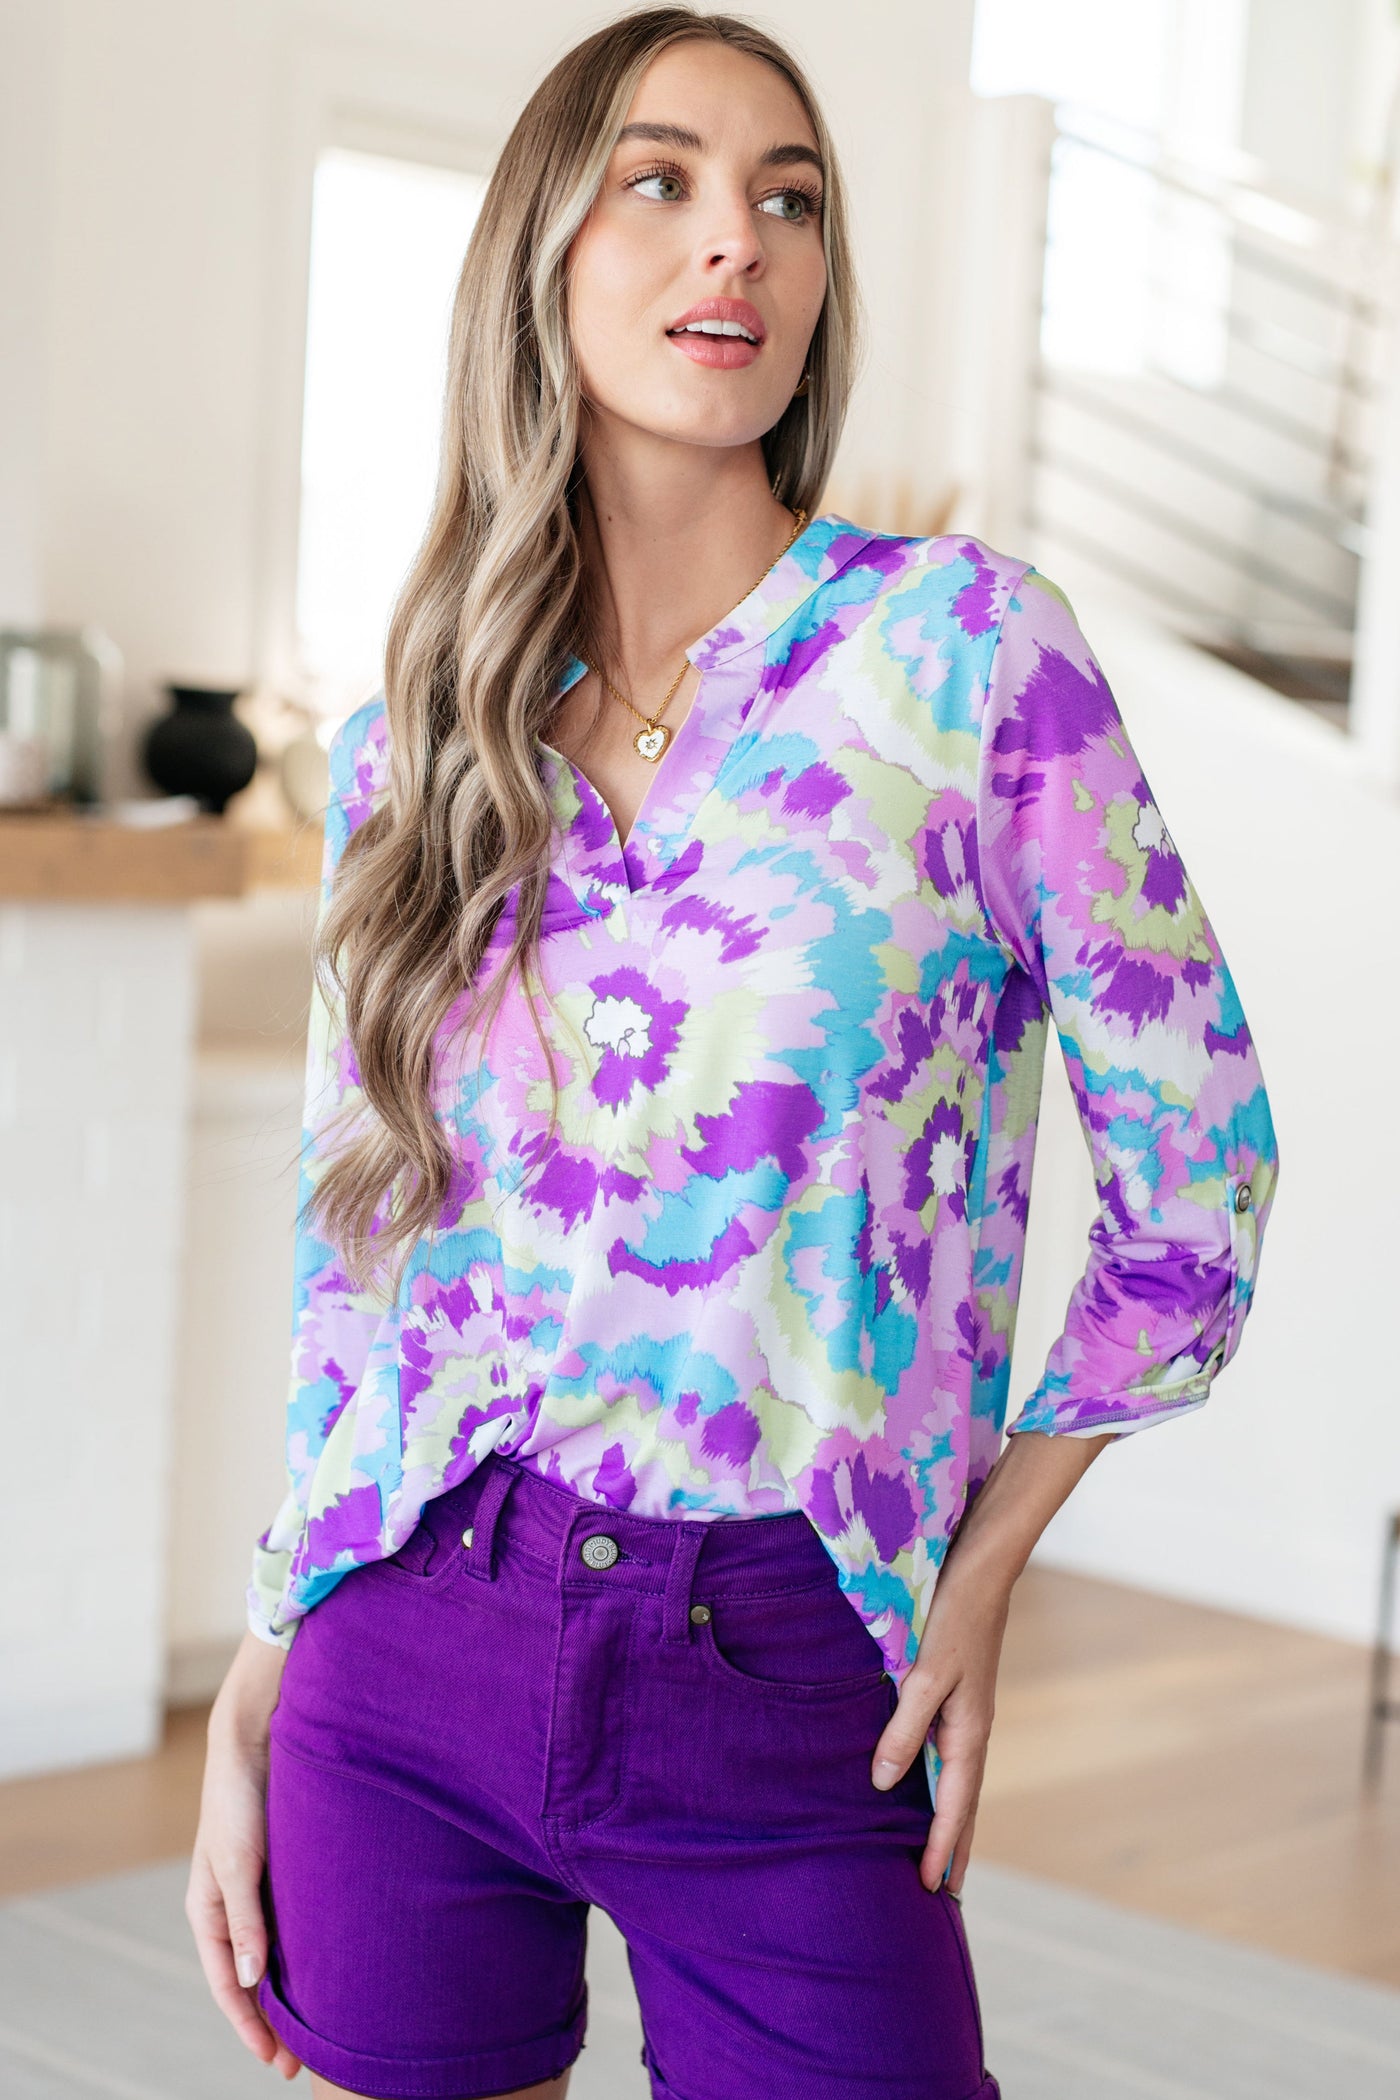 Lizzy Top in Lavender and Purple Brush Strokes-Tops-Ave Shops-Market Street Nest, Fashionable Clothing, Shoes and Home Décor Located in Mabank, TX